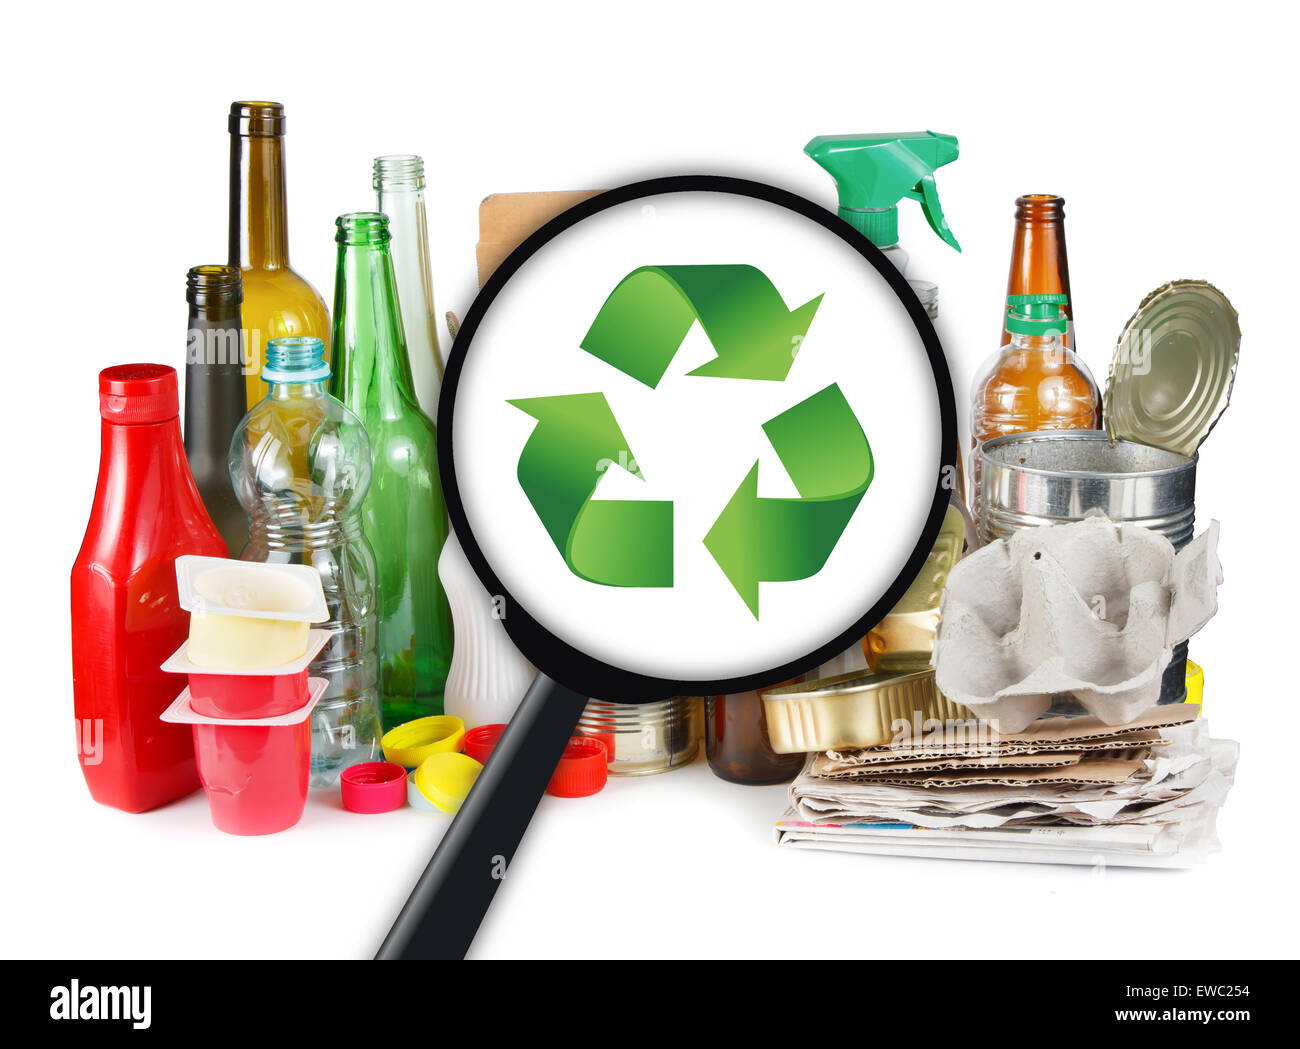 Men looking for a recycling symbol on plastic garbage Stock Photo